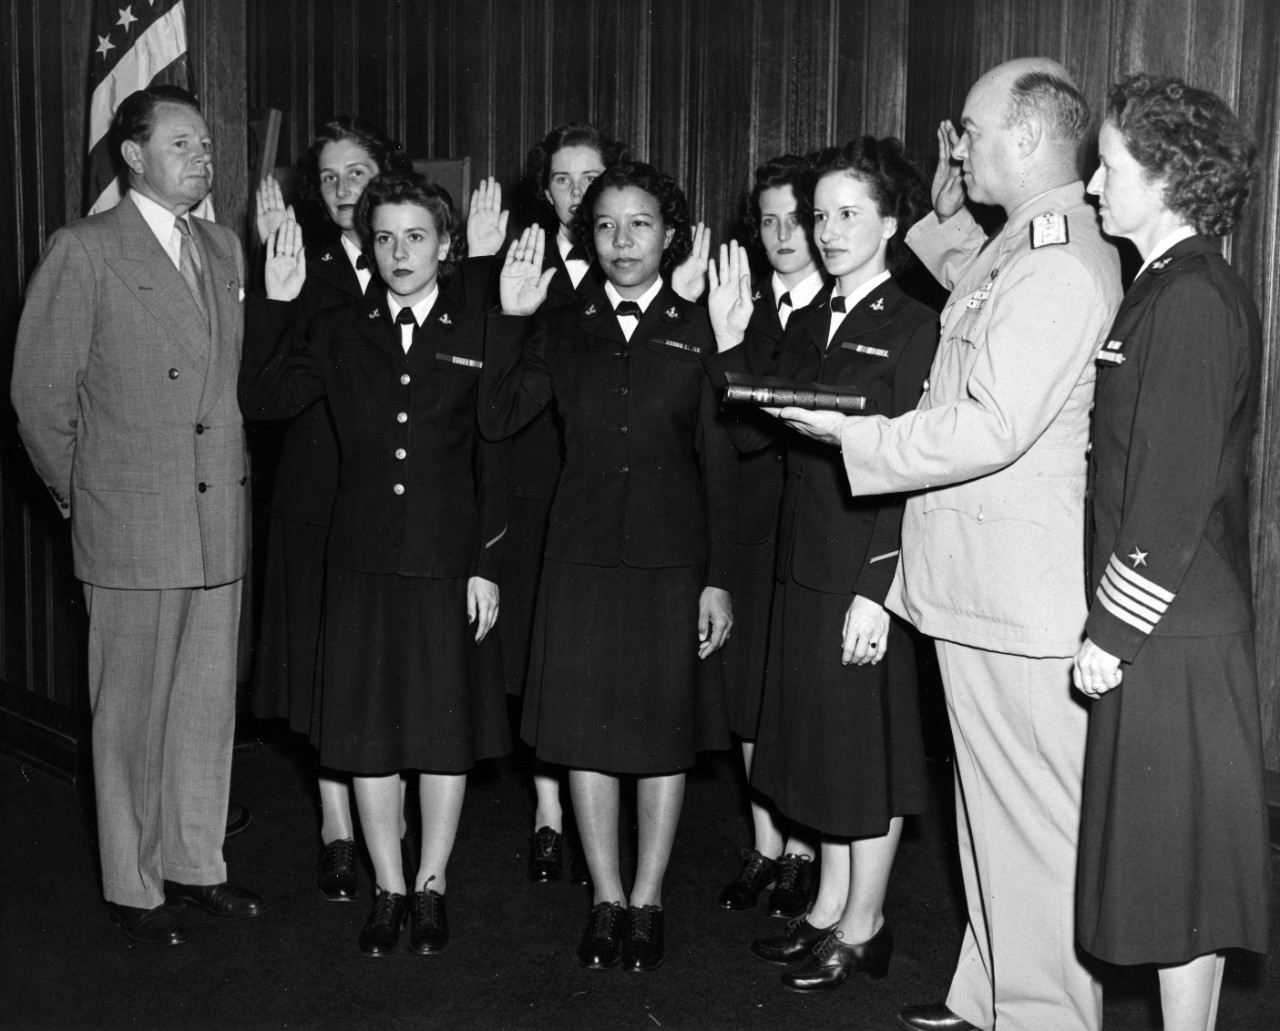 A group of women in uniform holding up their right hand. In the foreground, there are two gentlemen in suits and another woman in uniform.